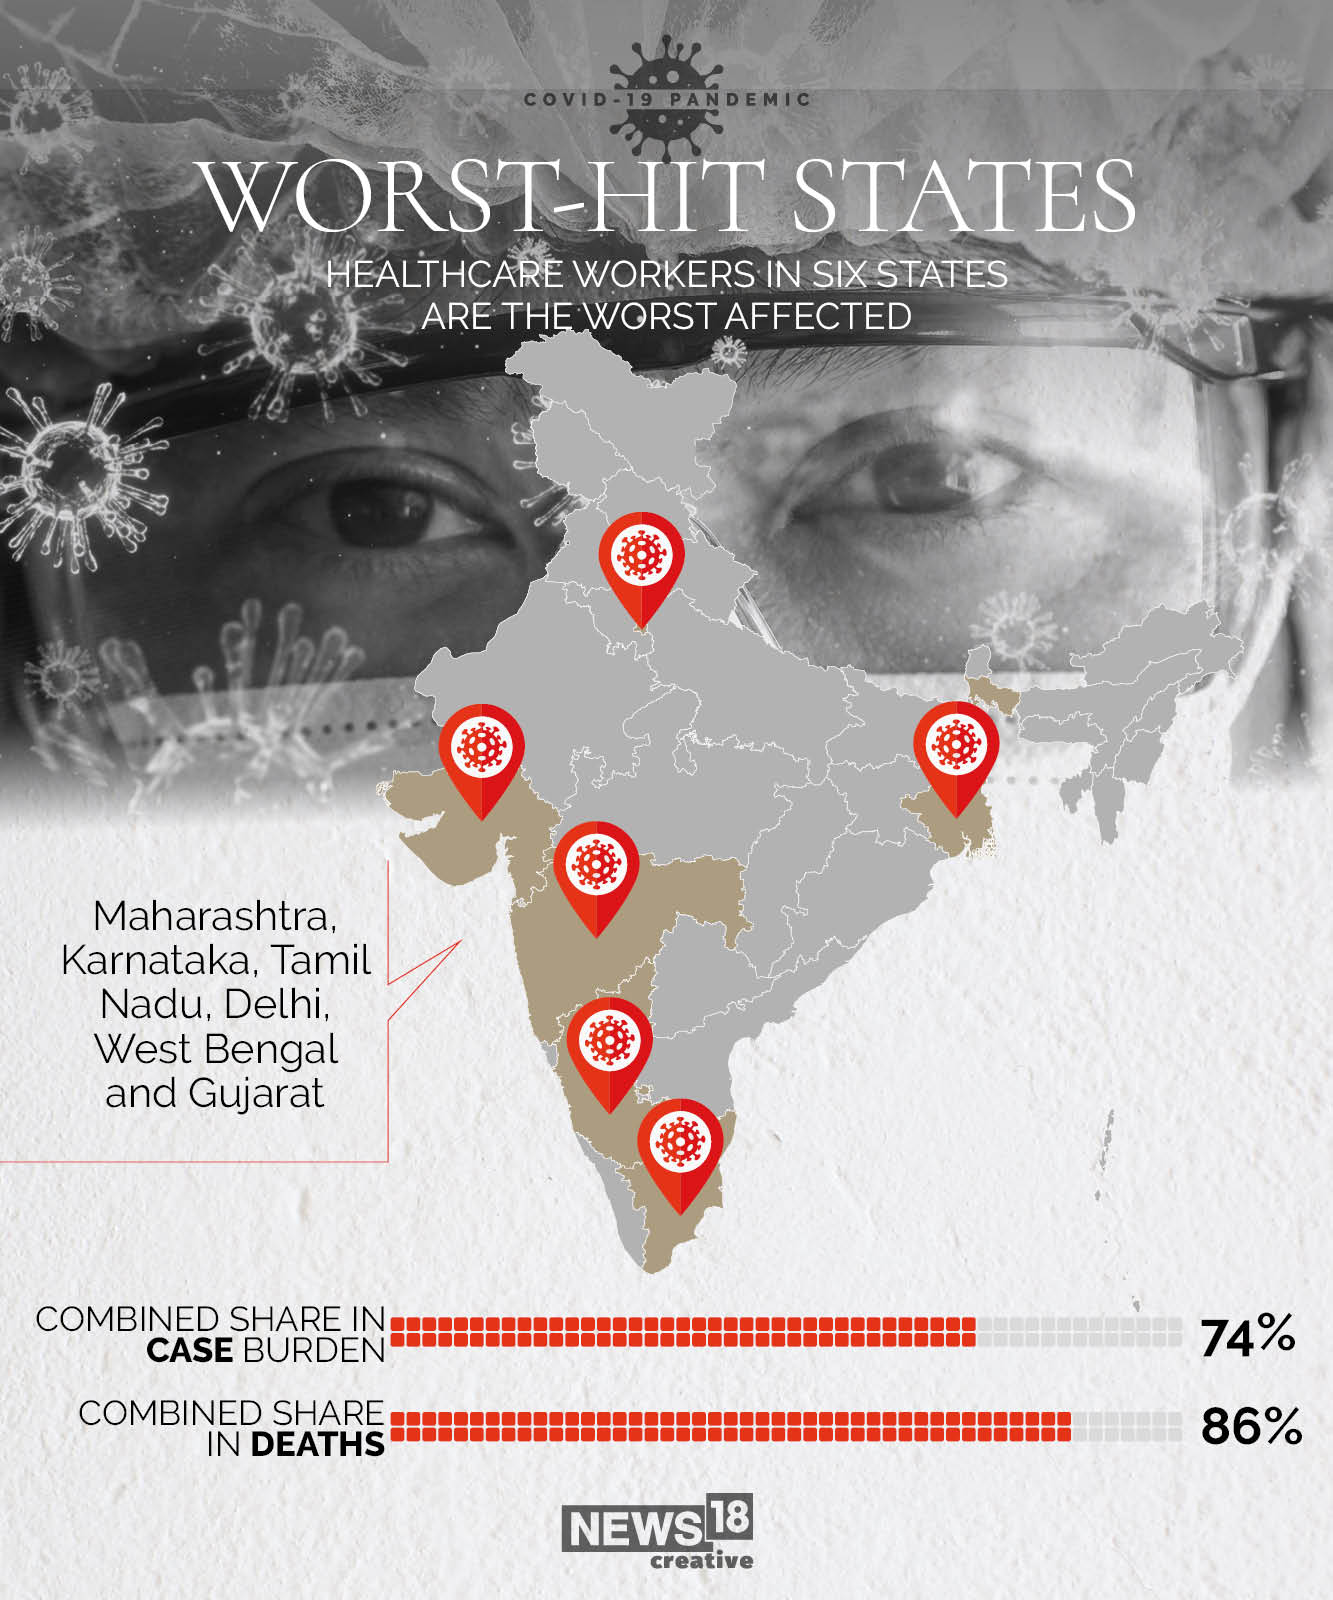 Covid-19: The 5 riskiest states to be a health worker in